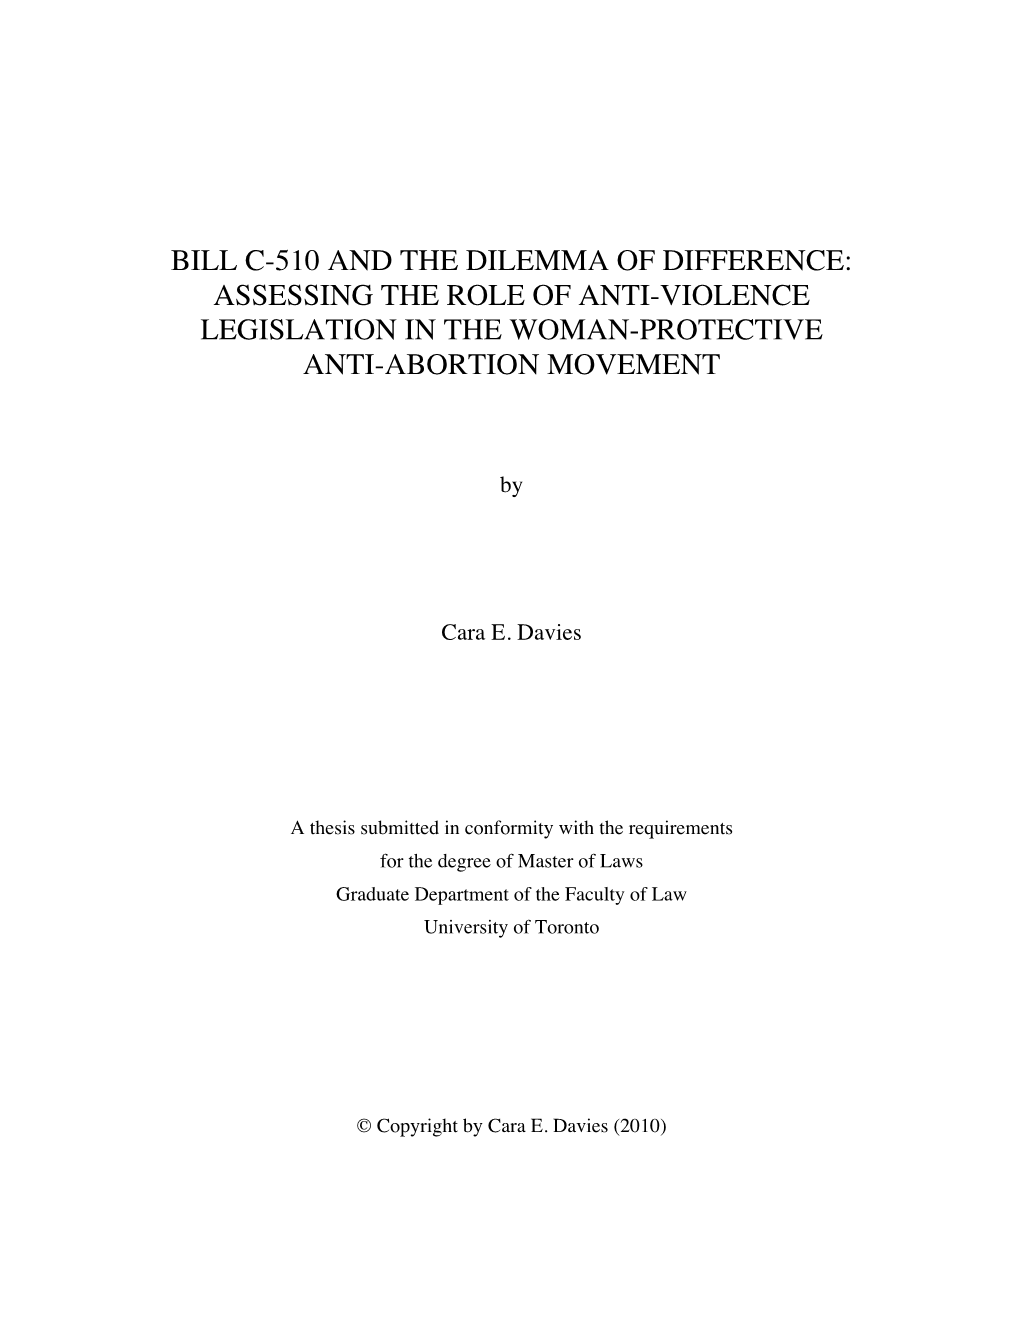 Bill C-510 and the Dilemma of Difference: Assessing the Role of Anti-Violence Legislation in the Woman-Protective Anti-Abortion Movement